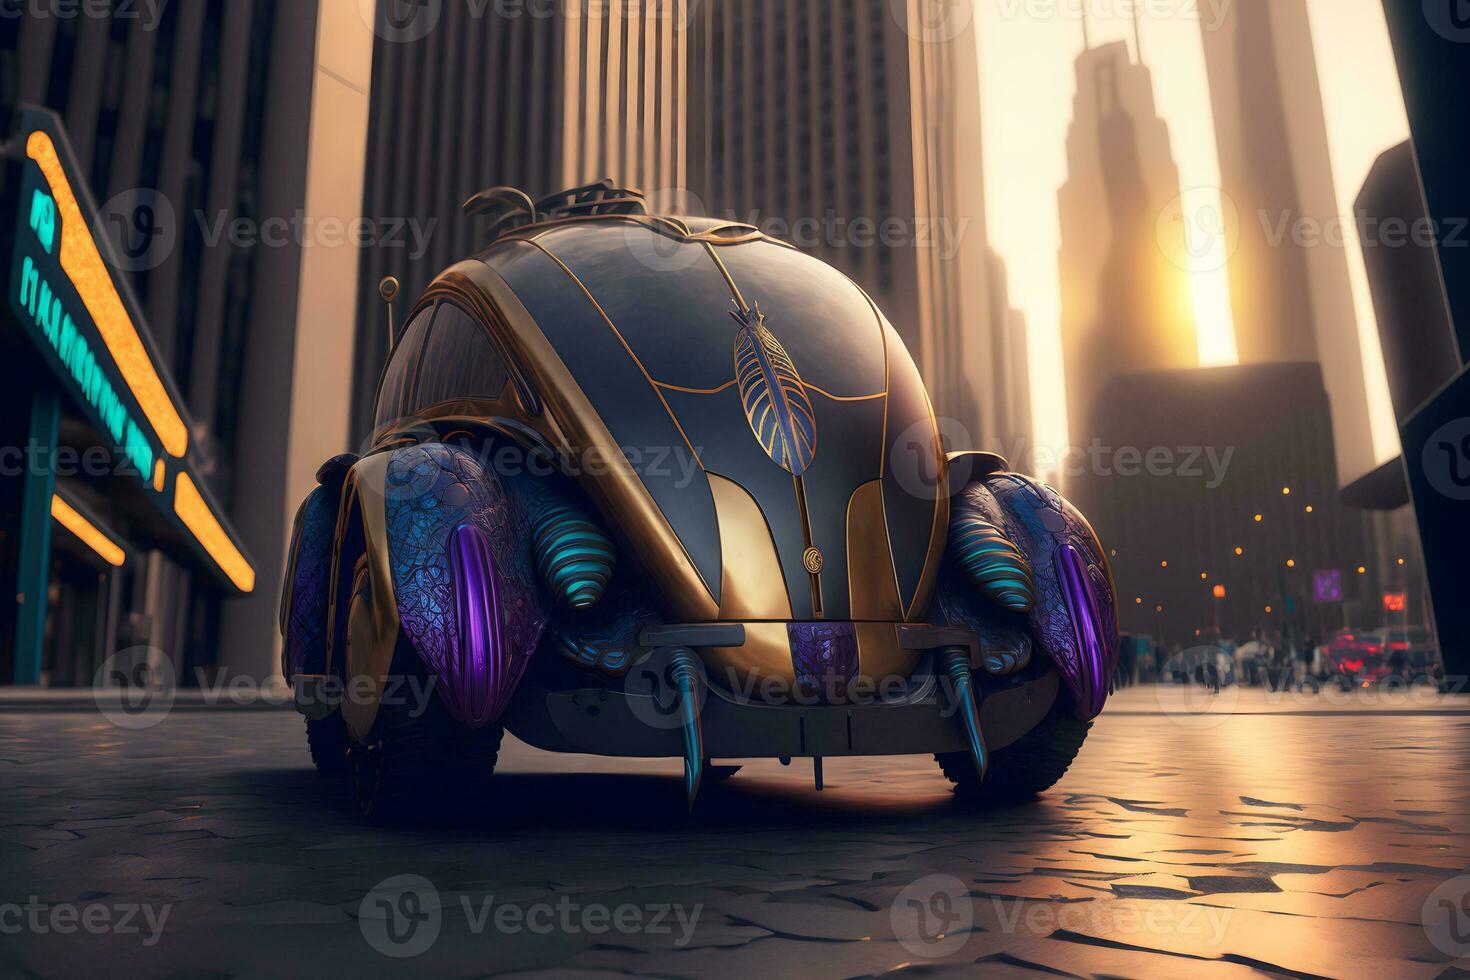 Modern futuristic car with bettle design in city center. Neural network generated art photo